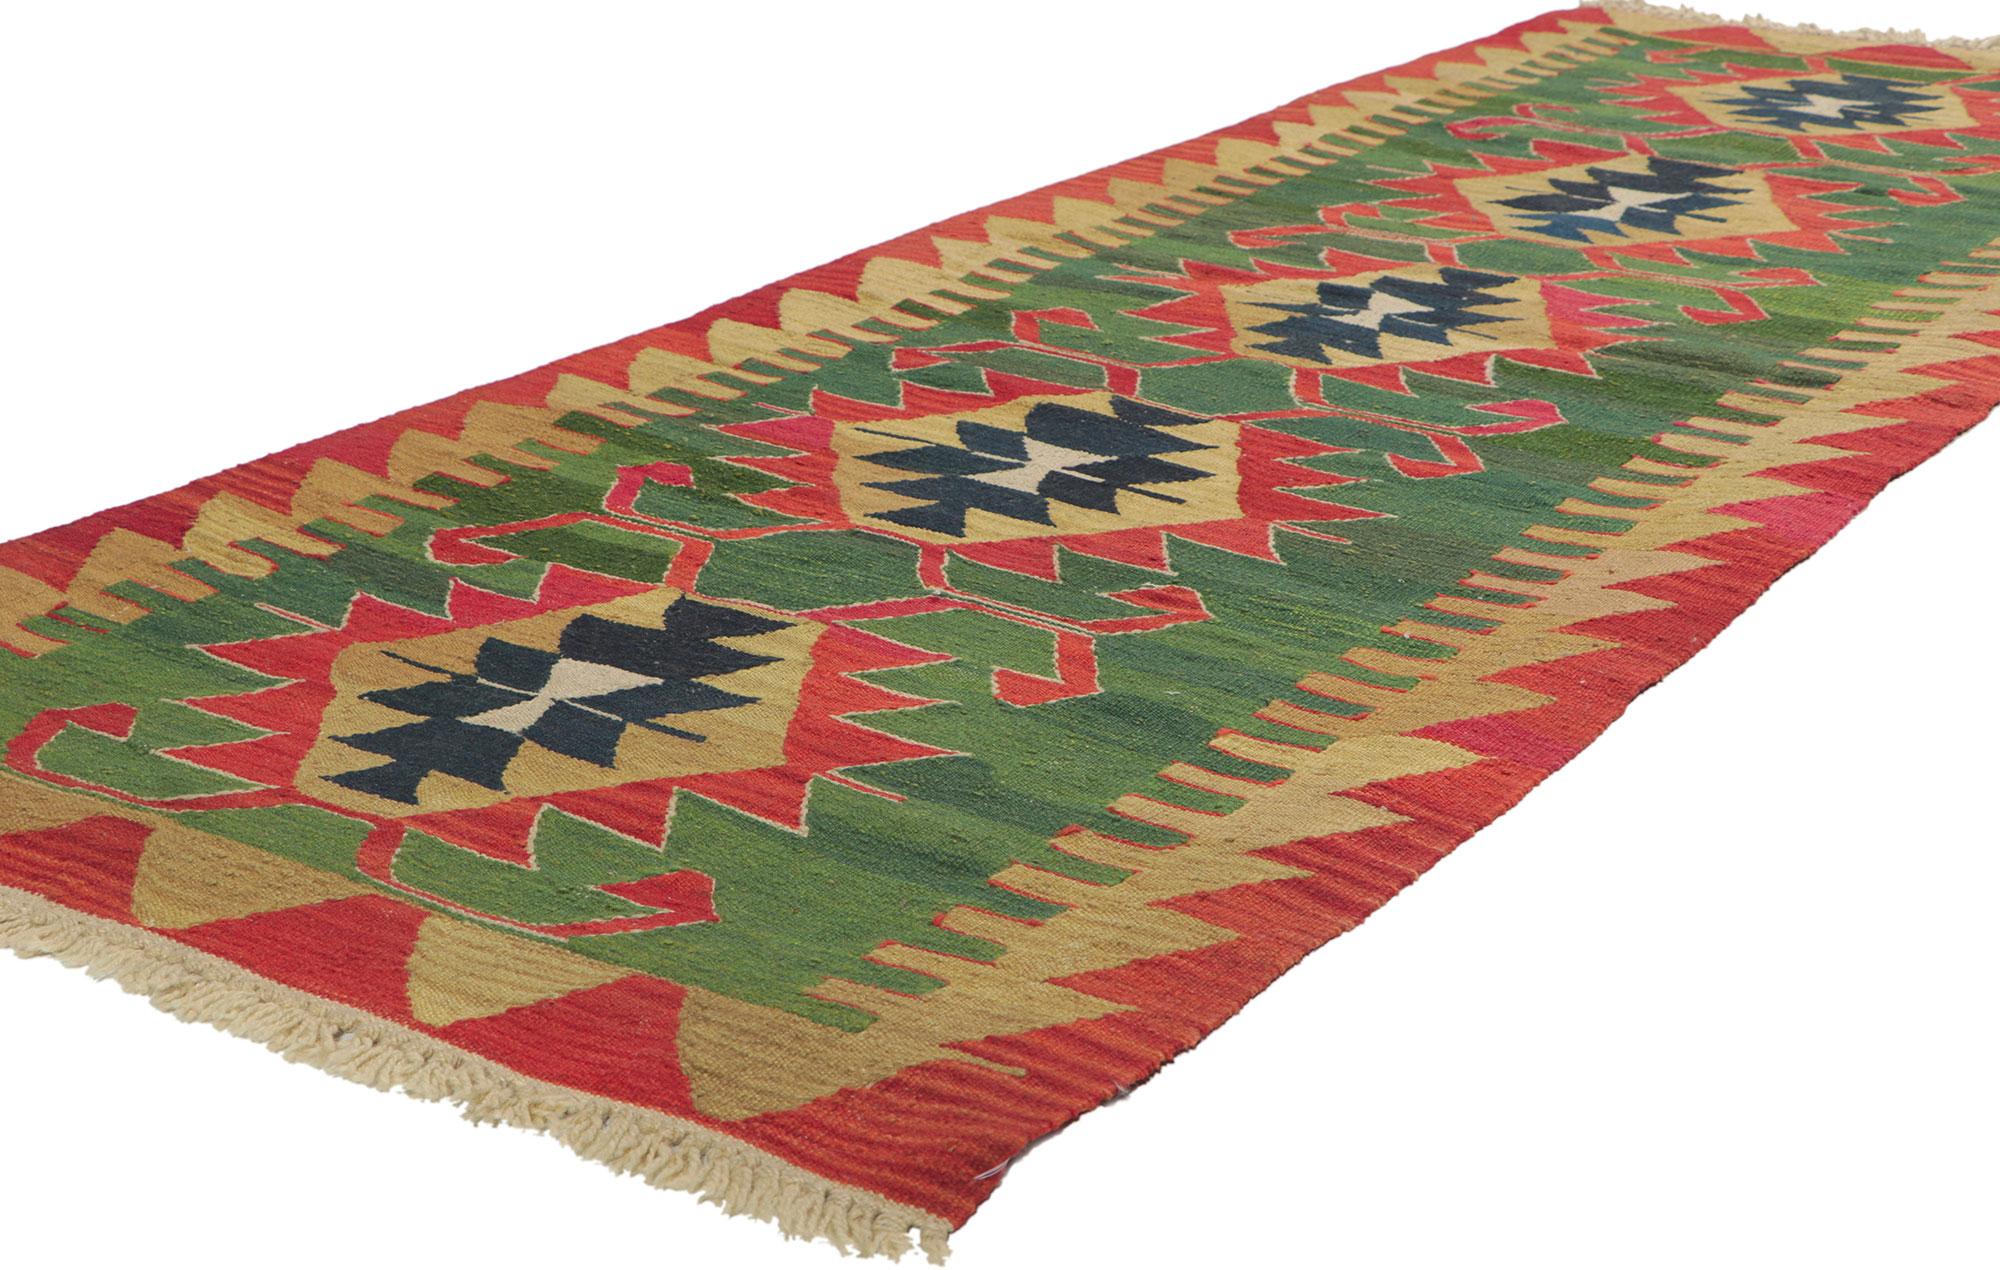 77604 Vintage Persian Shiraz Kilim Runner with Tribal Style, 02'09 x 07'08. Full of tiny details and a bold expressive design combined with vibrant colors and tribal style, this hand-woven wool vintage Persian Shiraz kilim runner is a captivating